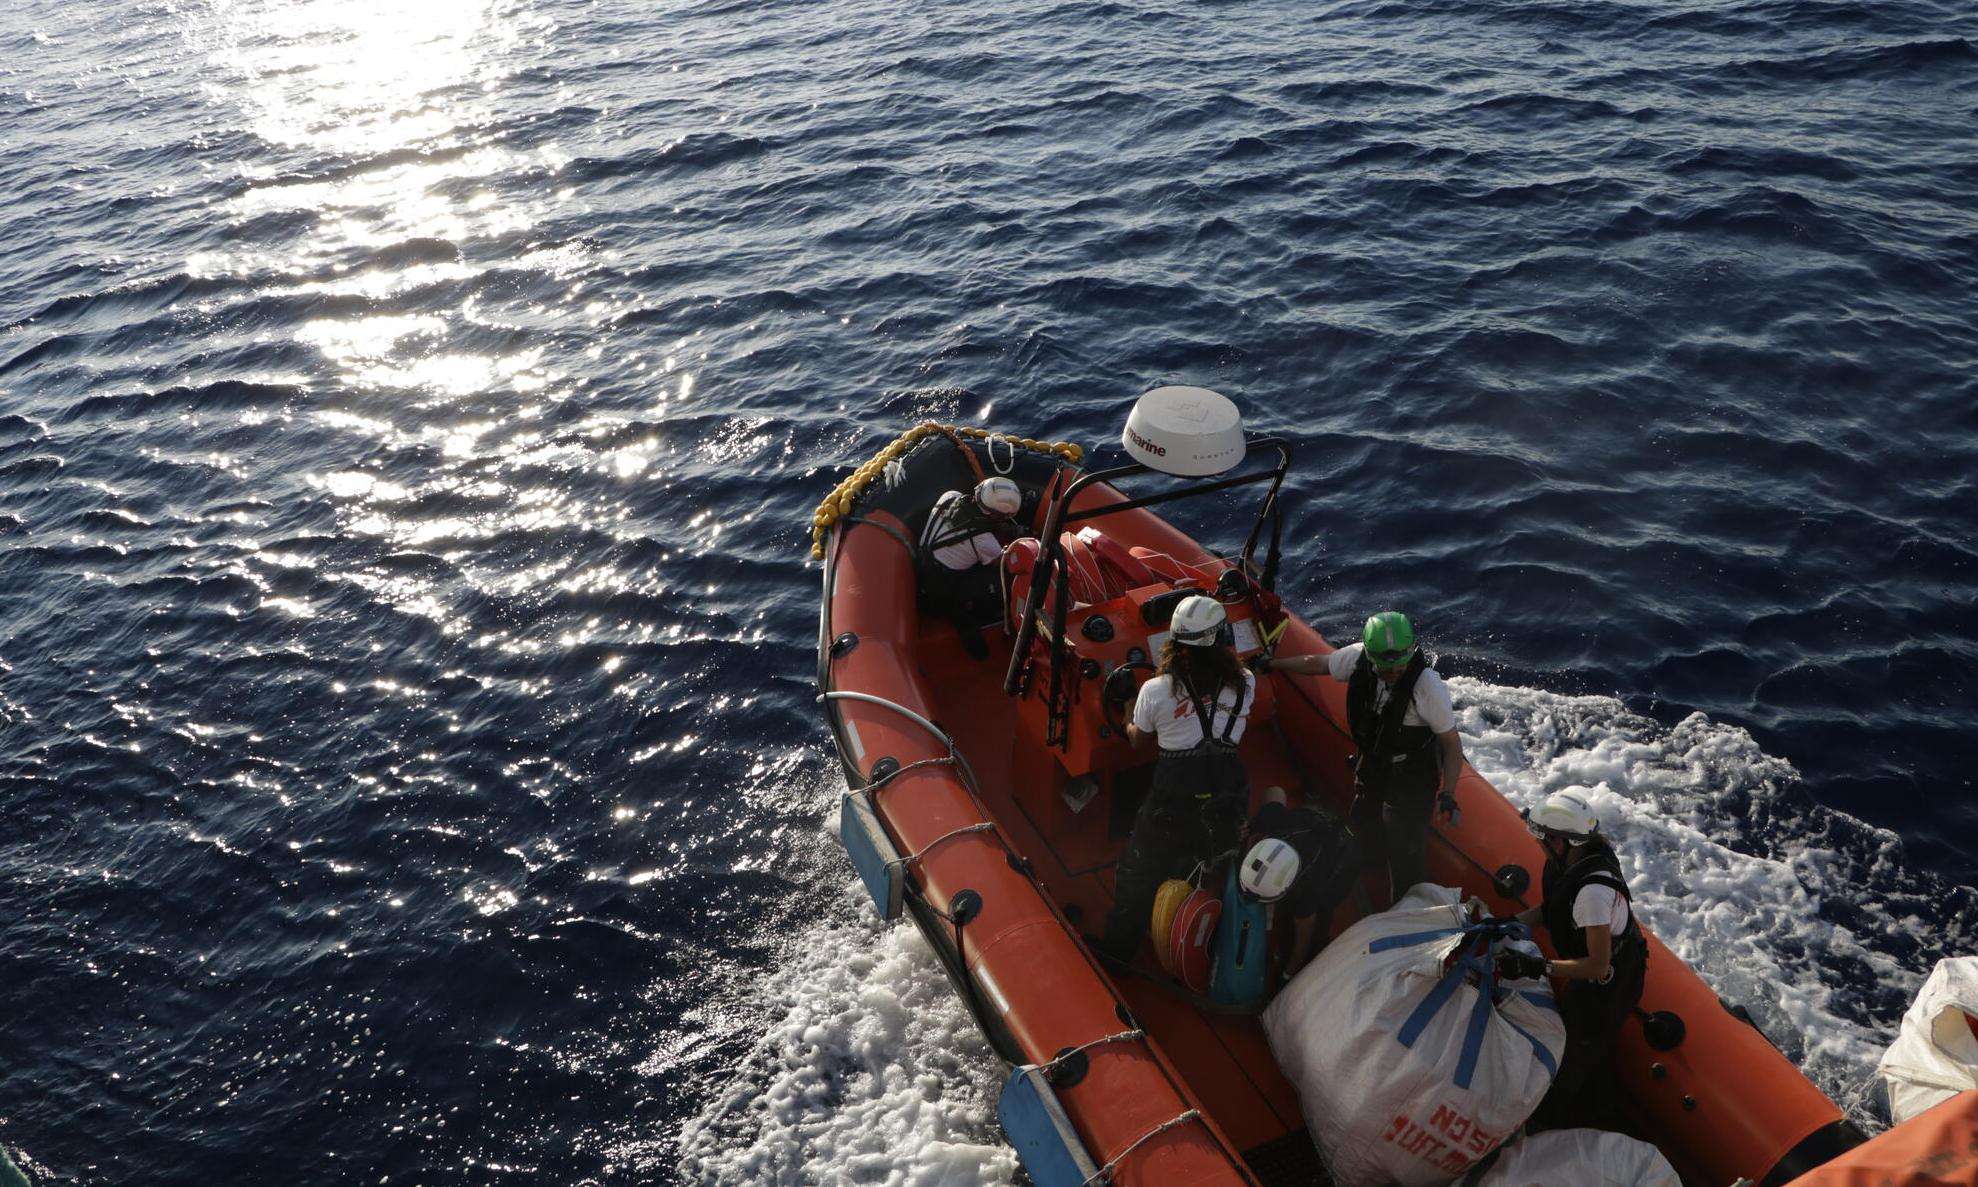 MSF search and rescue teams on an orange rescue boat respond to a migrant ship in distress in the Mediterranean sea 